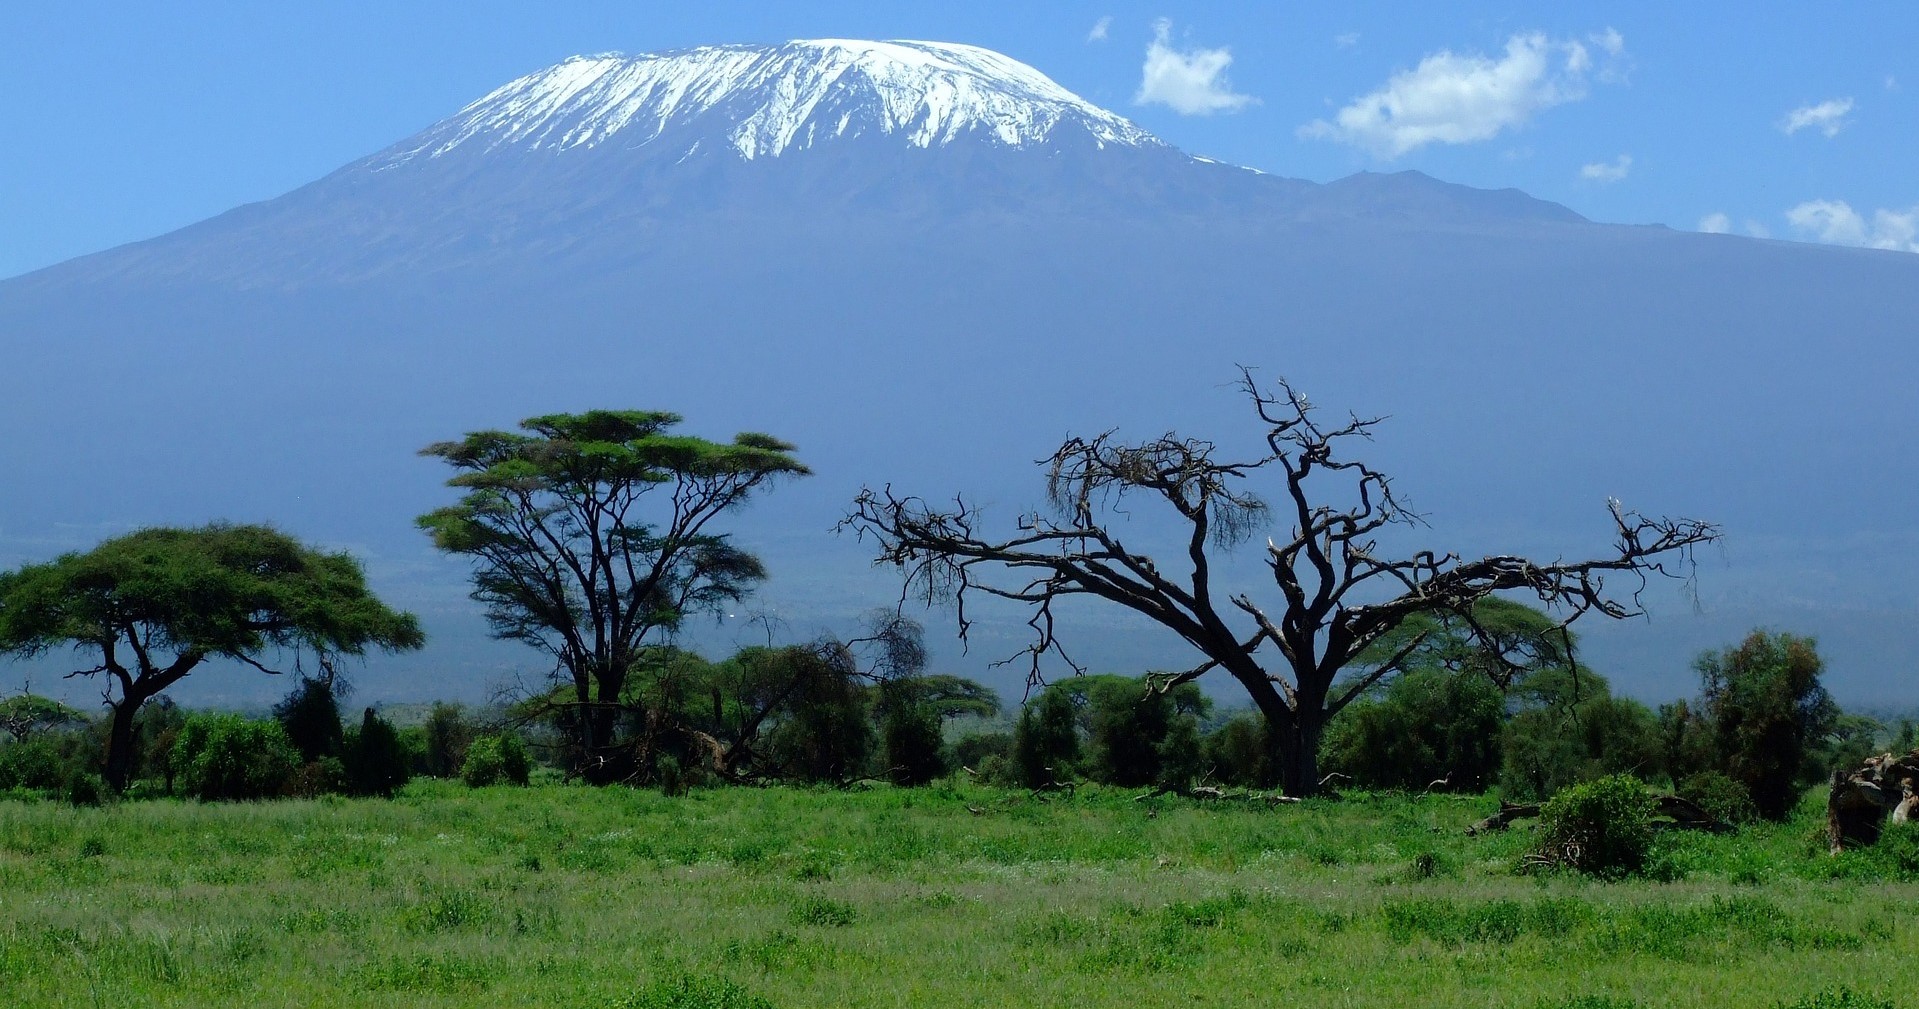 Snow-capped Kilimanjaro shown in the distance beyond green vegetation